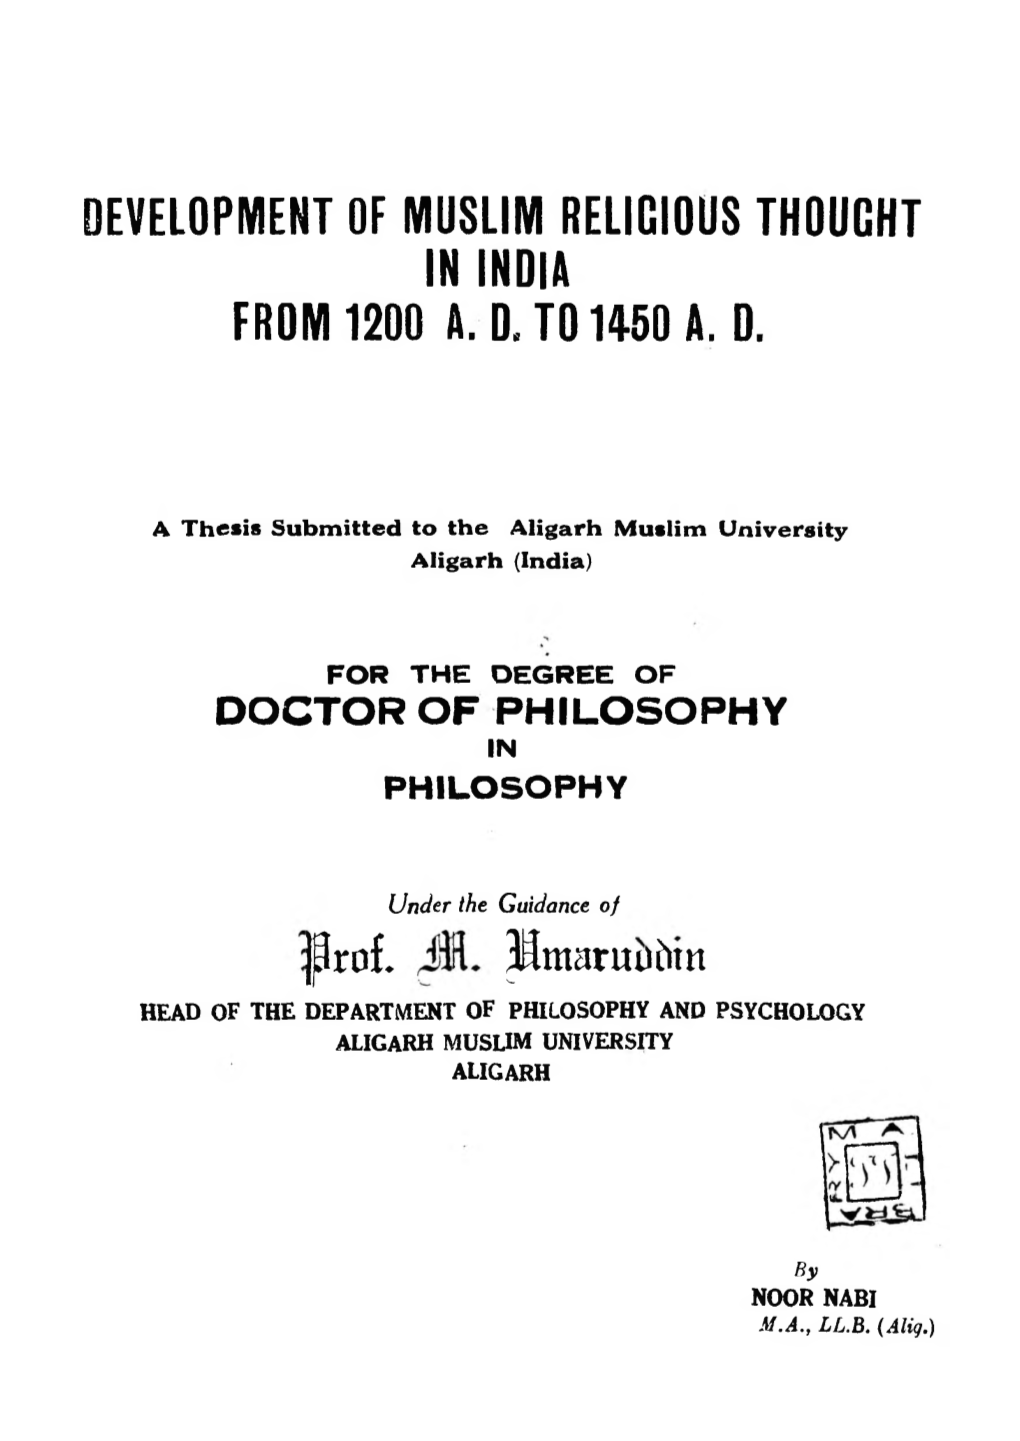 Development of Moslim Religious Thought in India from 1200 «